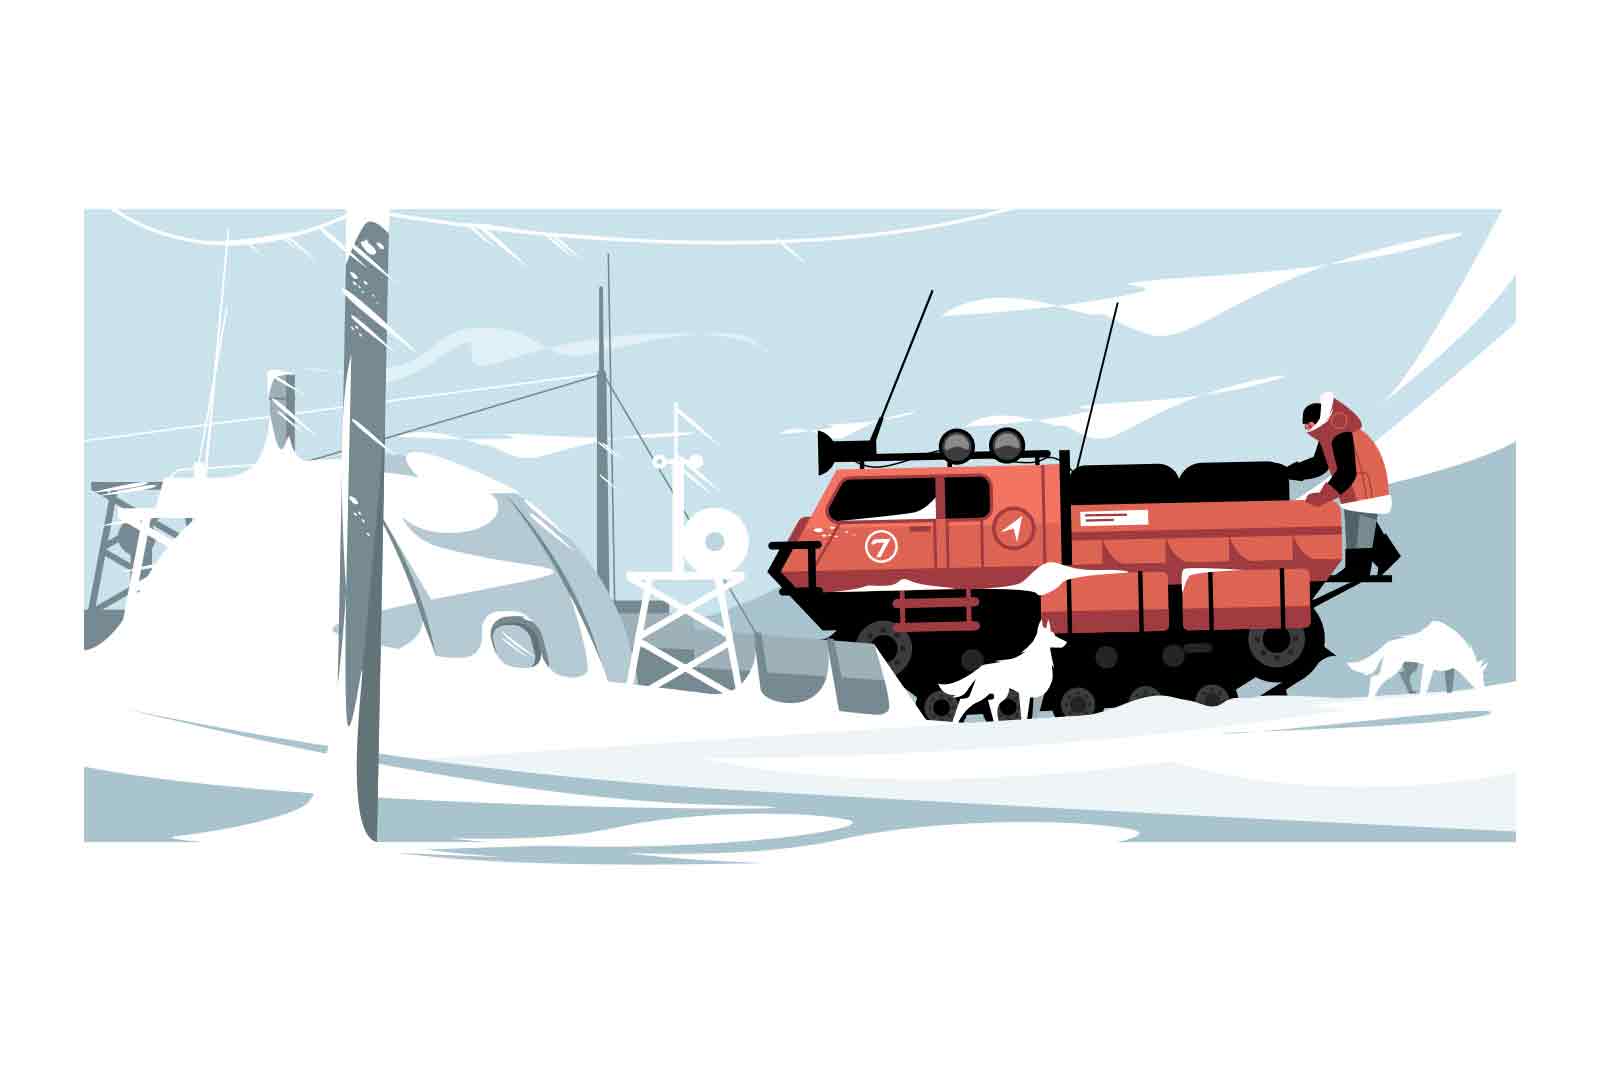 Man polar scientist climb on truck, mobile shelter vector illustration. Research station, antarctic polar flat style. Research, expedition concept